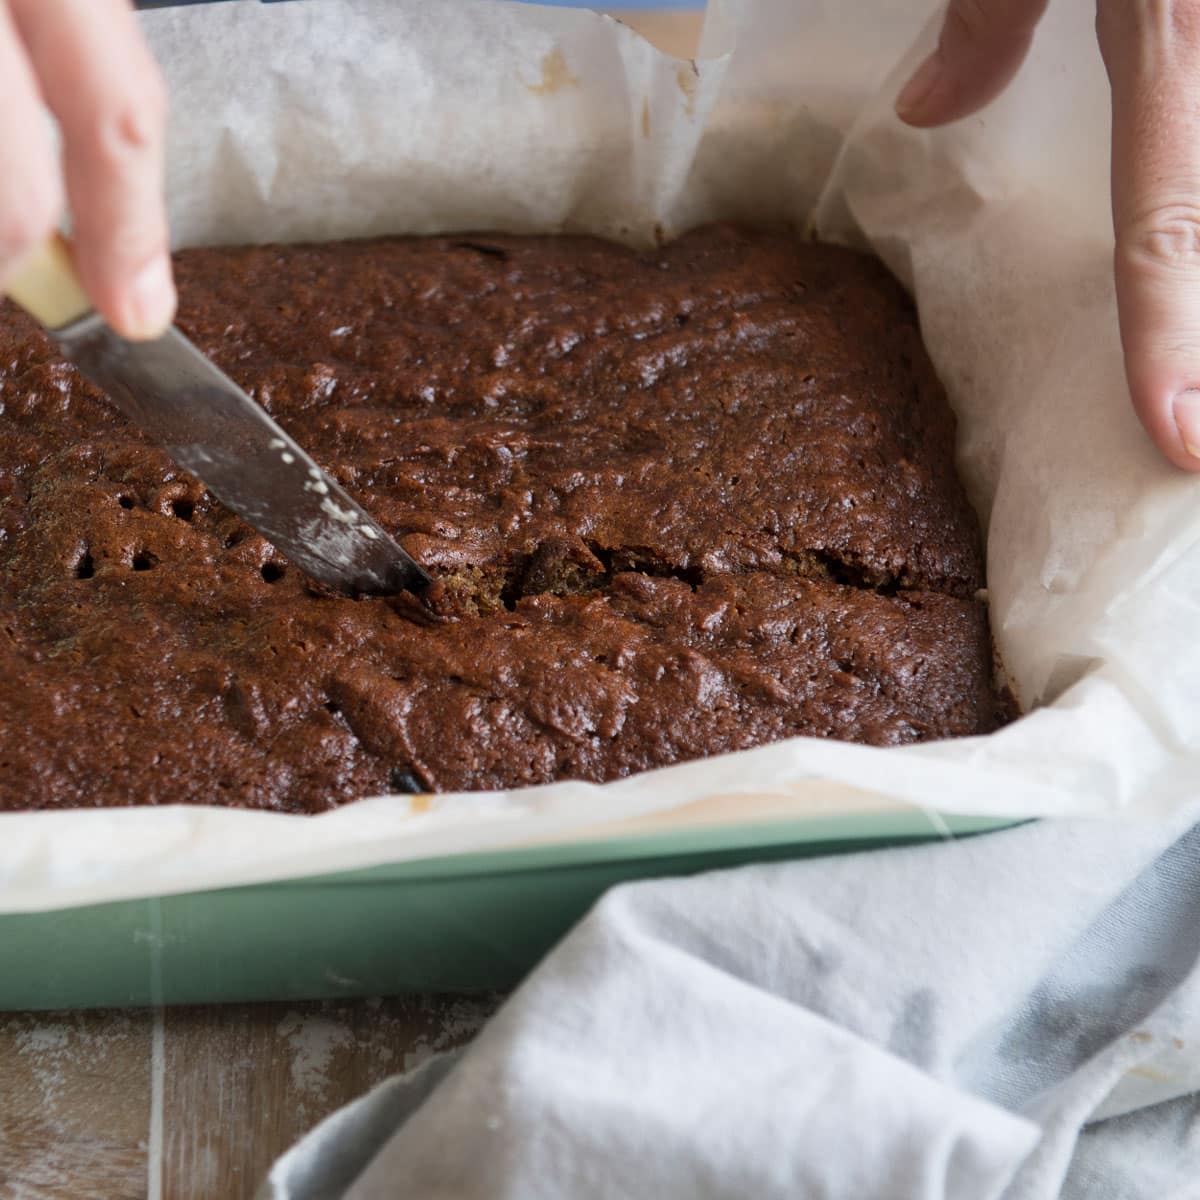 Master the art of brownie baking by avoiding these 10 common mistakes. Learn from our expert tips to achieve perfectly moist, delicious brownies every time.